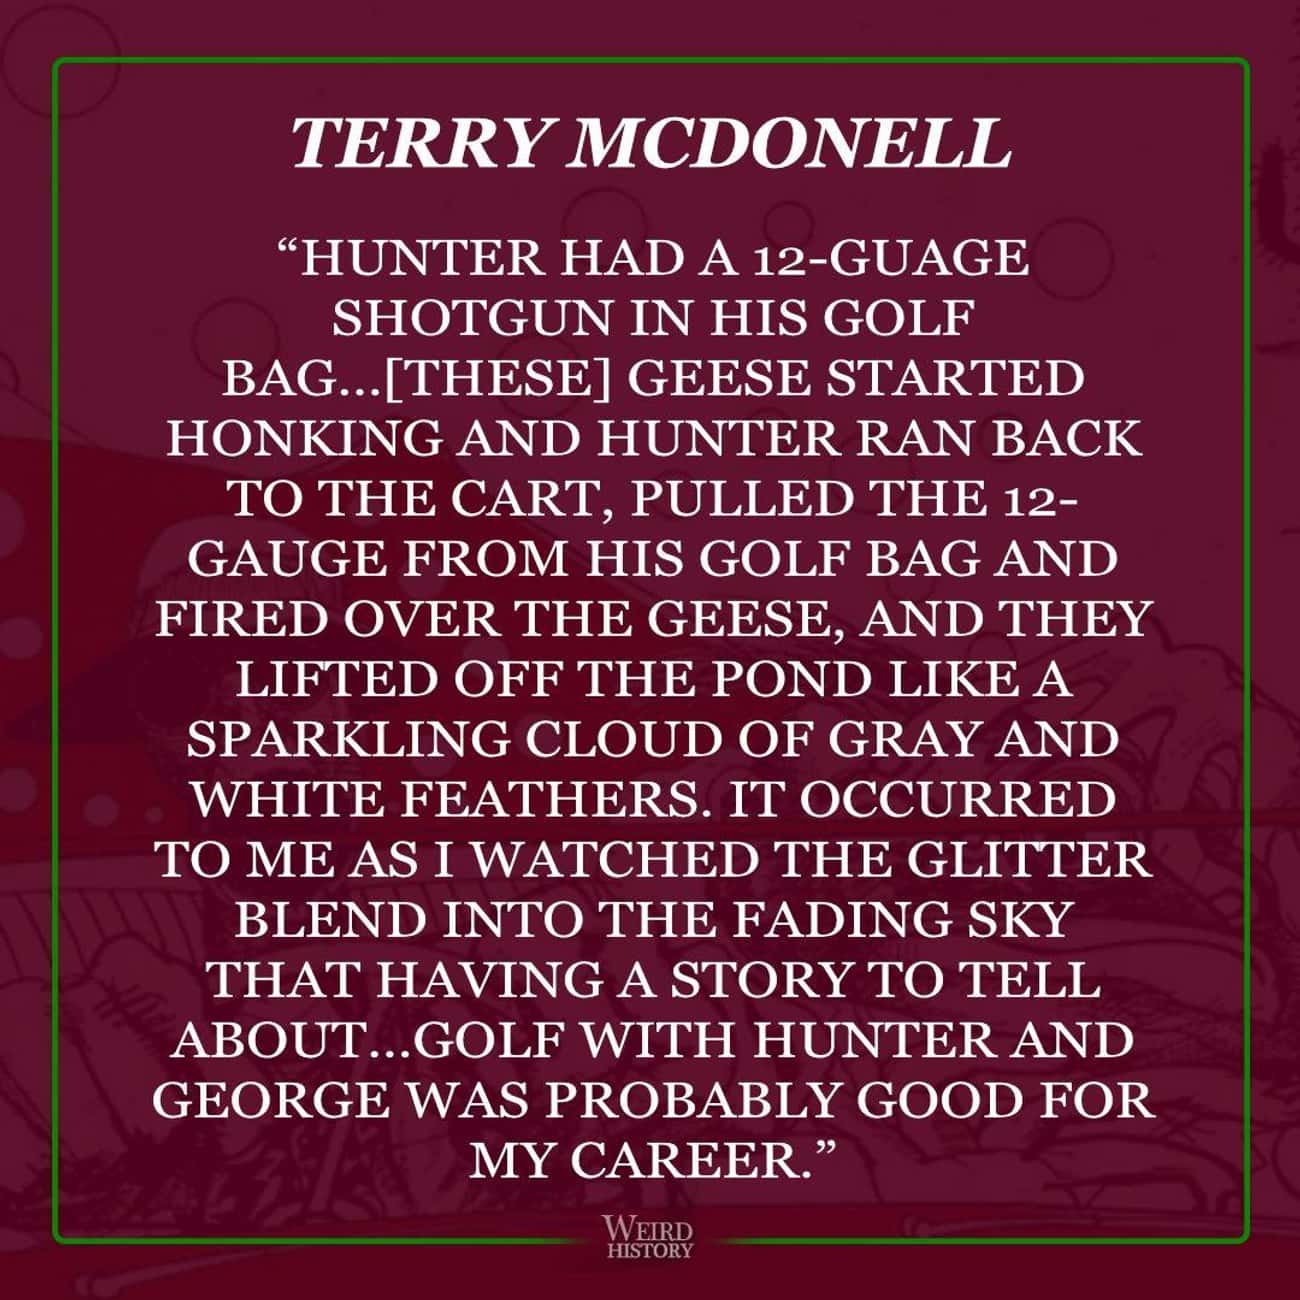 Terry McDonell Remembers Him Aiming At Geese On A Golf Course